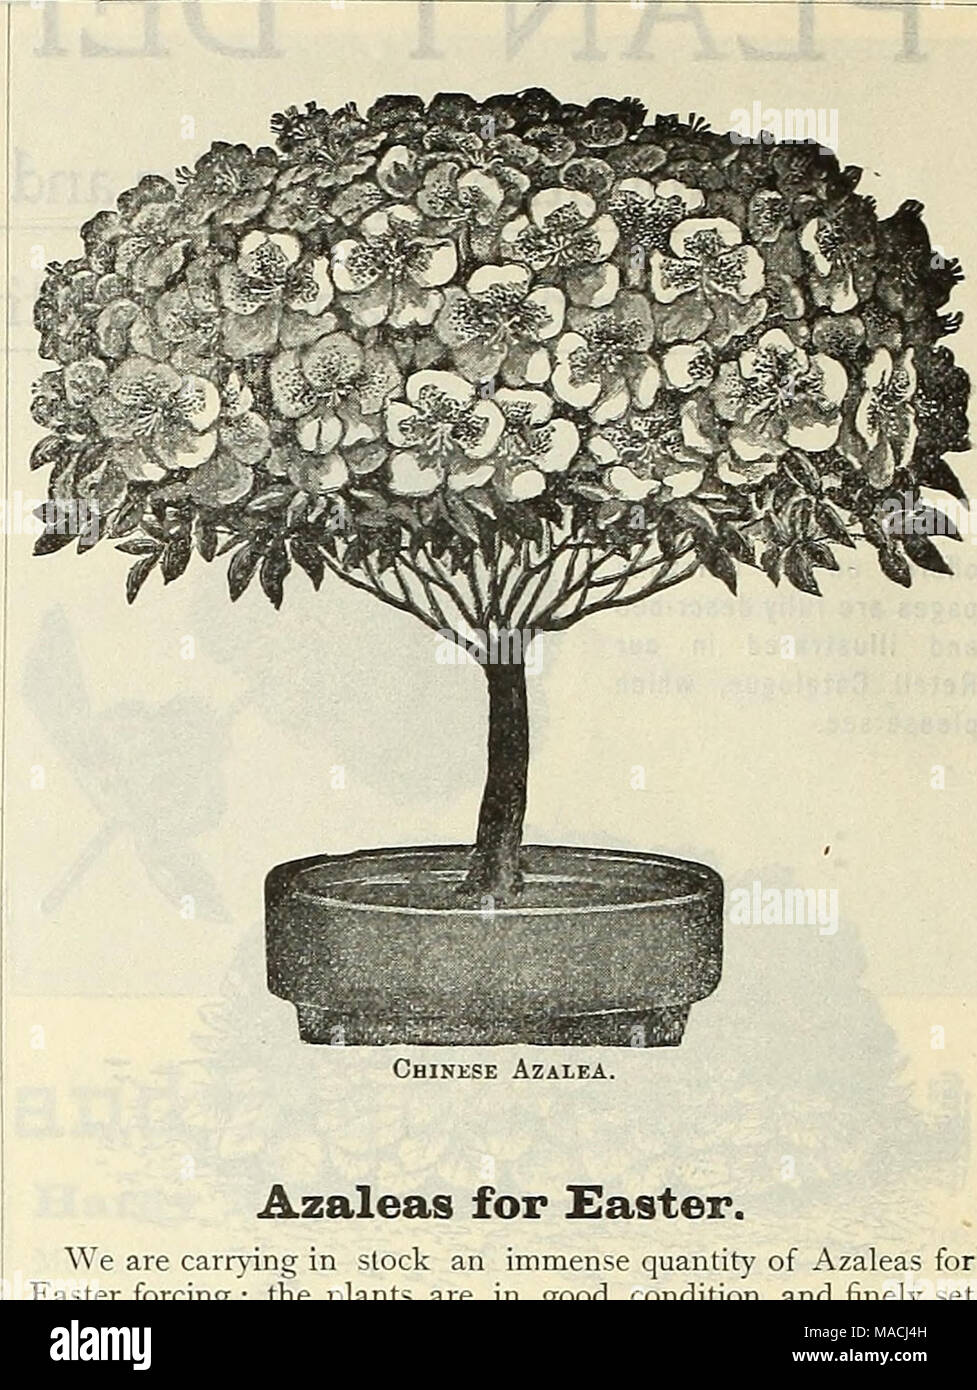 . Dreer's wholesale price list for 1901 : flower seeds, bulbs, aquatics, plants vegetable seeds, tools, implements, fertilizers, etc., etc . 14 to 15 1 50 2 ^o Arancaria Cooki £legantissinia. A limited stock of this rare species. 5-inch pots, 8 inches high, ^1.25 each. Aristolochia Gigas Stnrtevanti. The Duck Plant. 3-inch pots, 35 cents each. Asparagns Sprengeri. This variety is becoming more popular every season, the de- mand during the past winter having been exceptionally strong. 3-inch pots, 75 cts. per doz.; g 6 00 per 100. 5 &quot; §2 00 &quot; 15 00 &quot; 6 &quot; 3 50 &quot; 25 00 &q Stock Photo